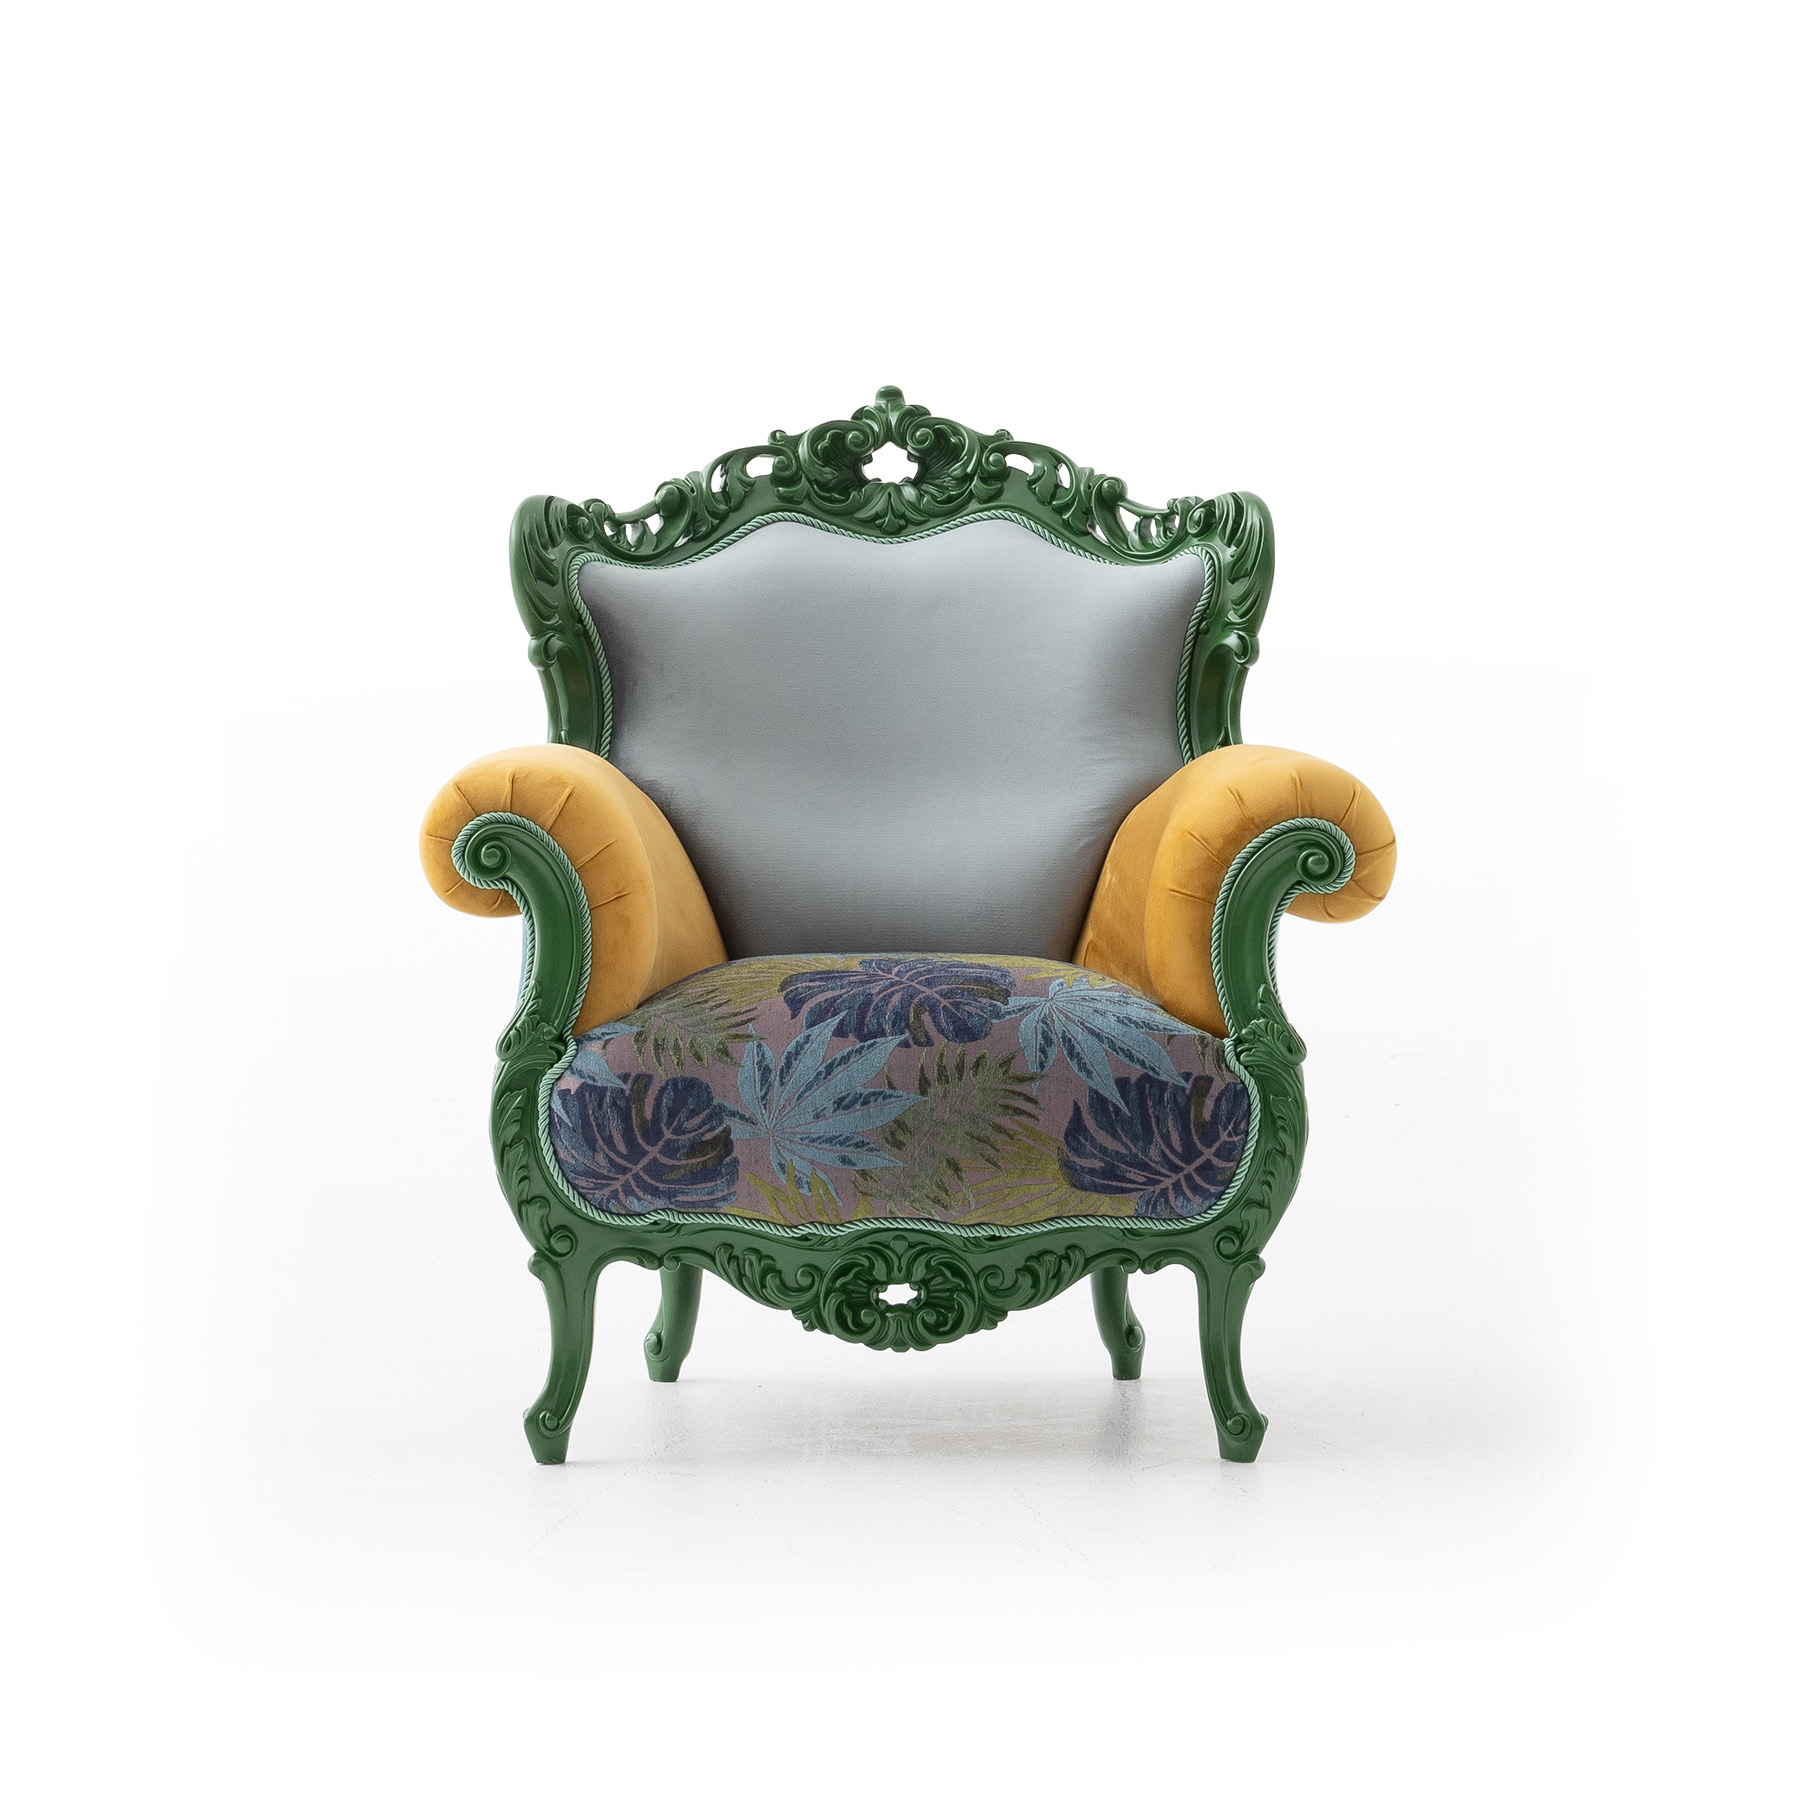 Picasso Amazon Armchair - Artistic Accent chair combination of green yellow and blue colors with green wood color